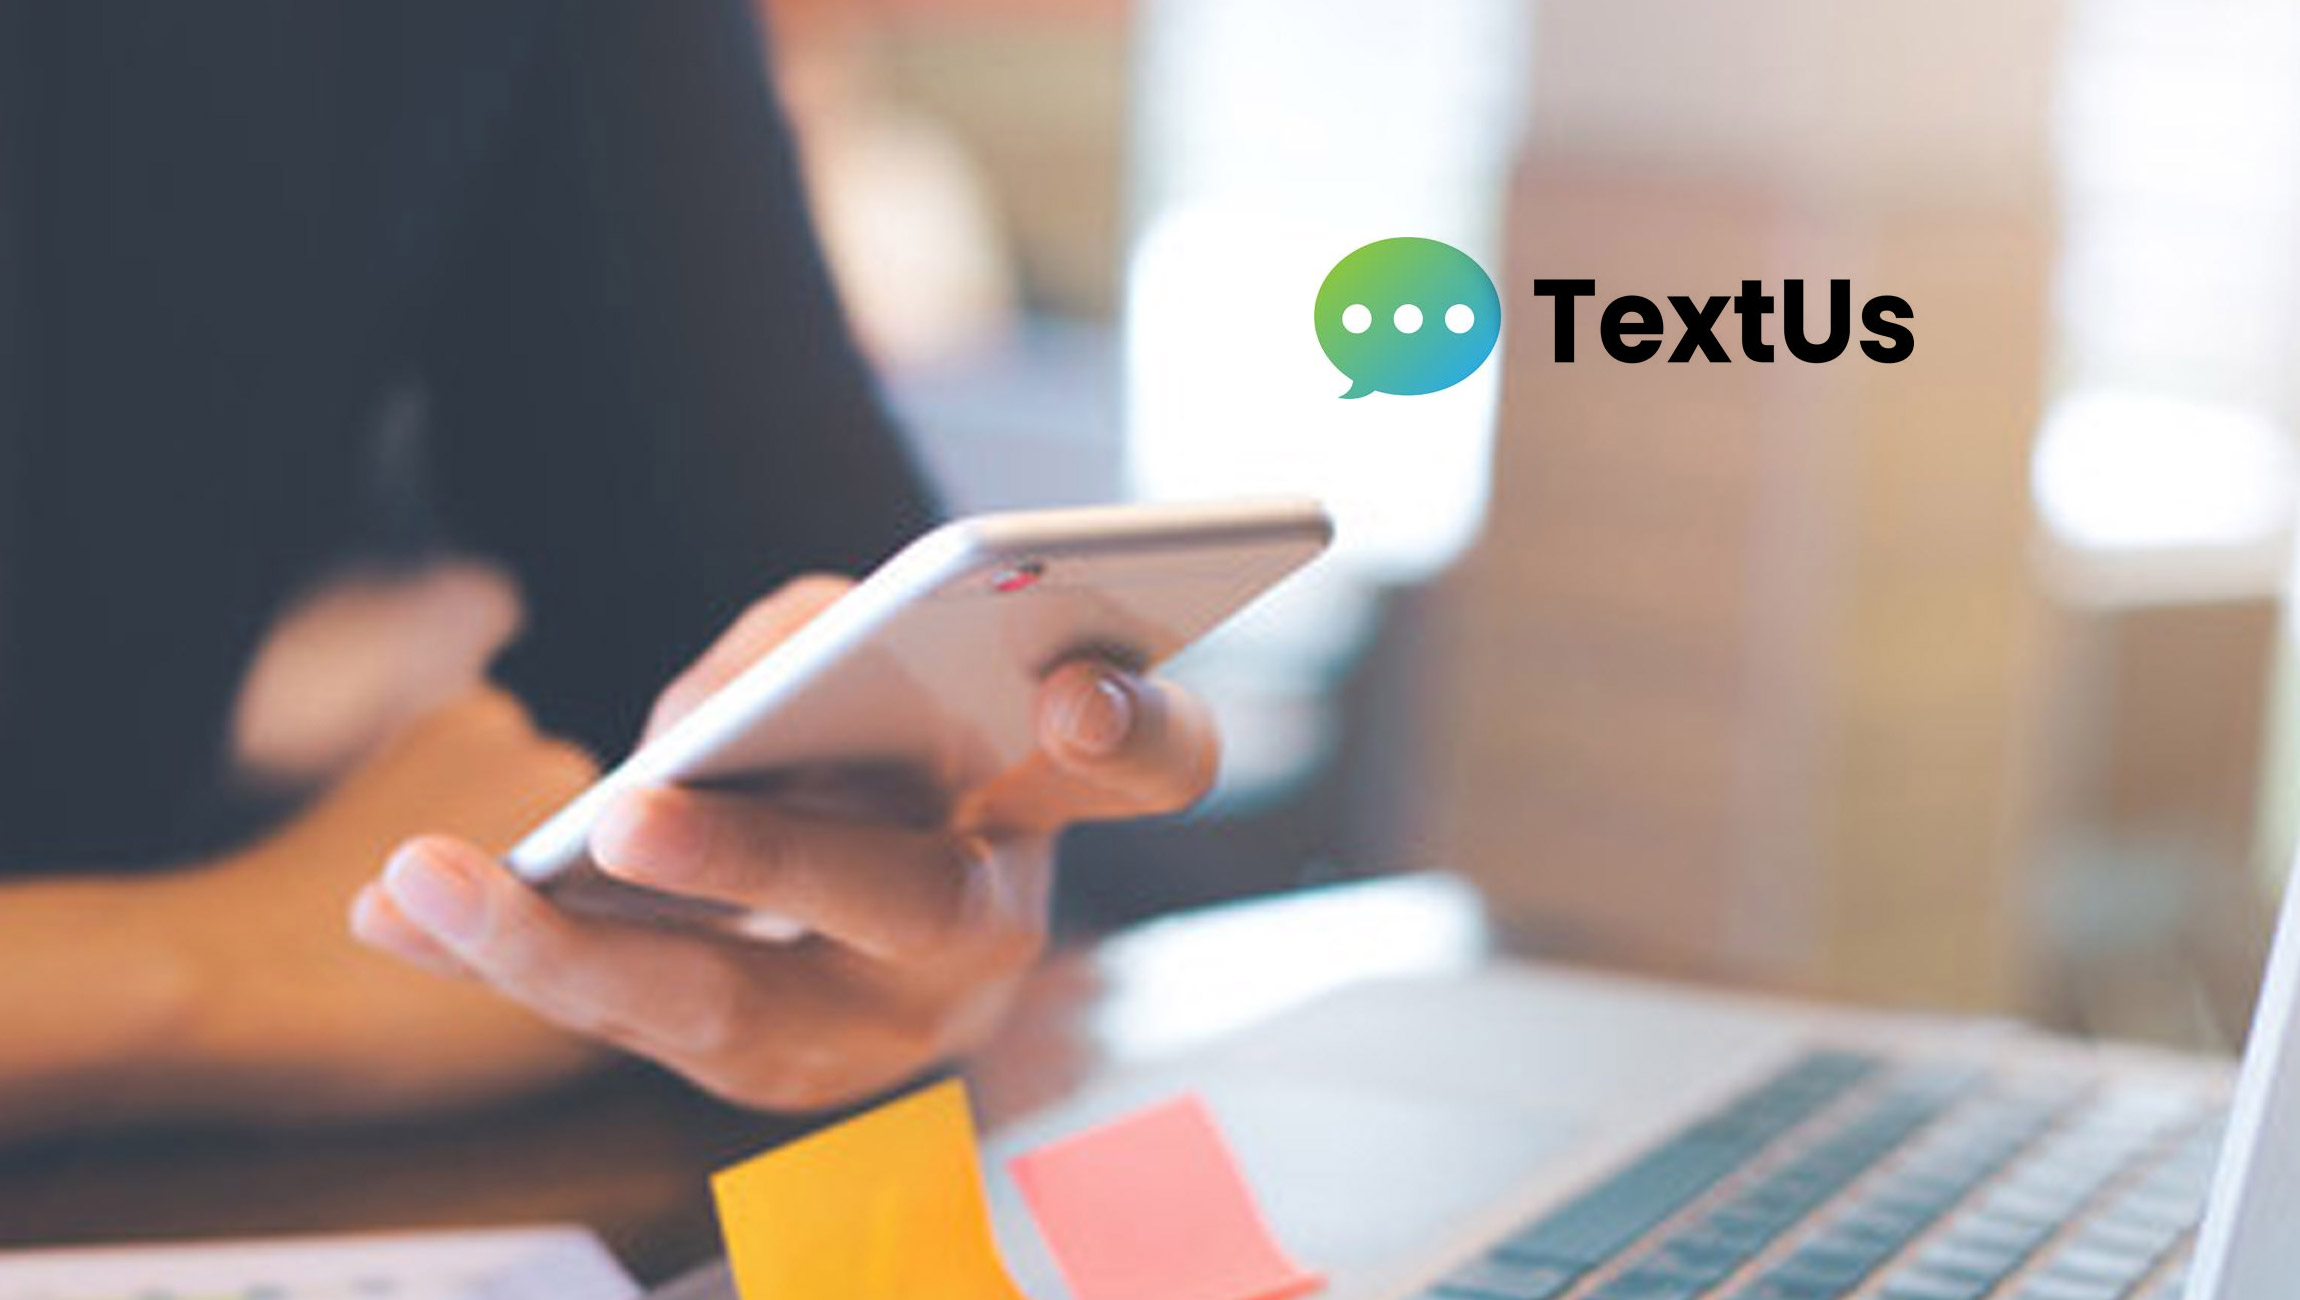 TextUs Launches Conversation Import, Enabling Data Migration from Prior Texting Providers 1